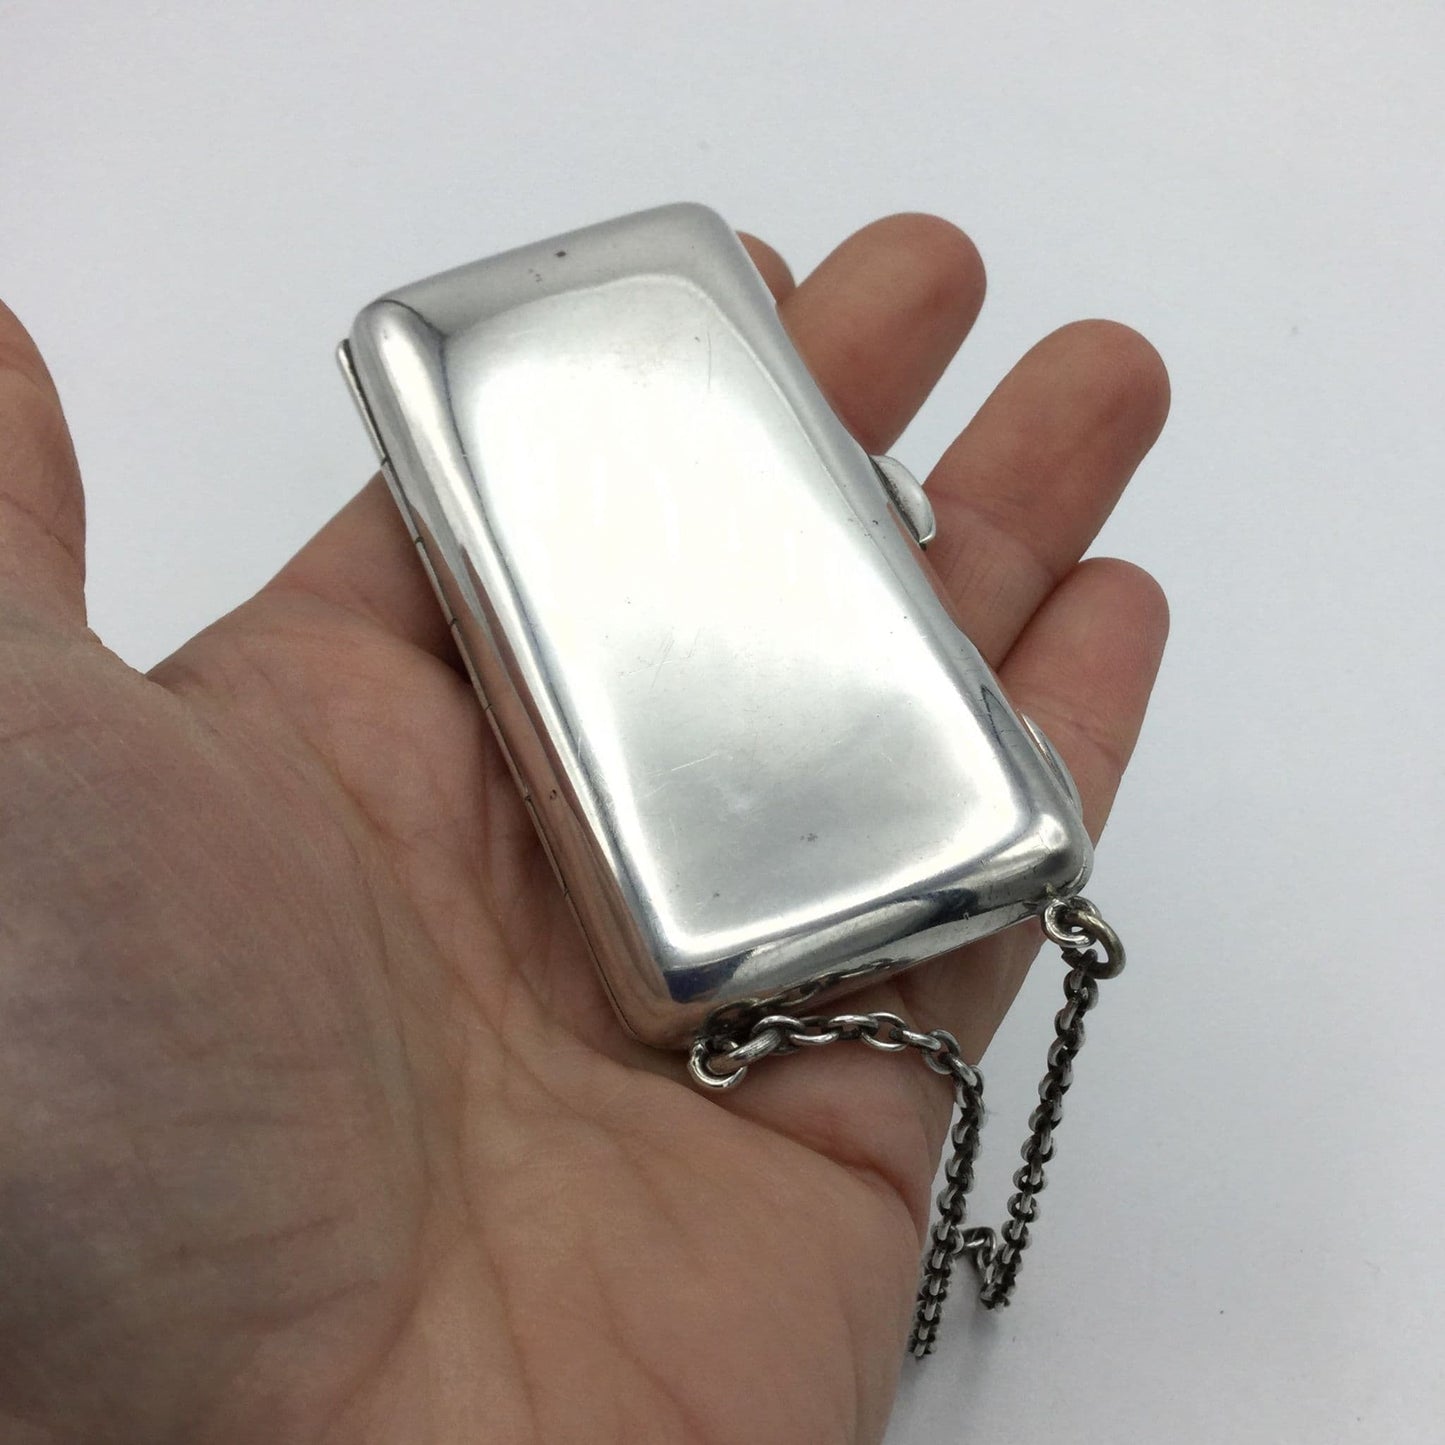 silver case with chain in a hand